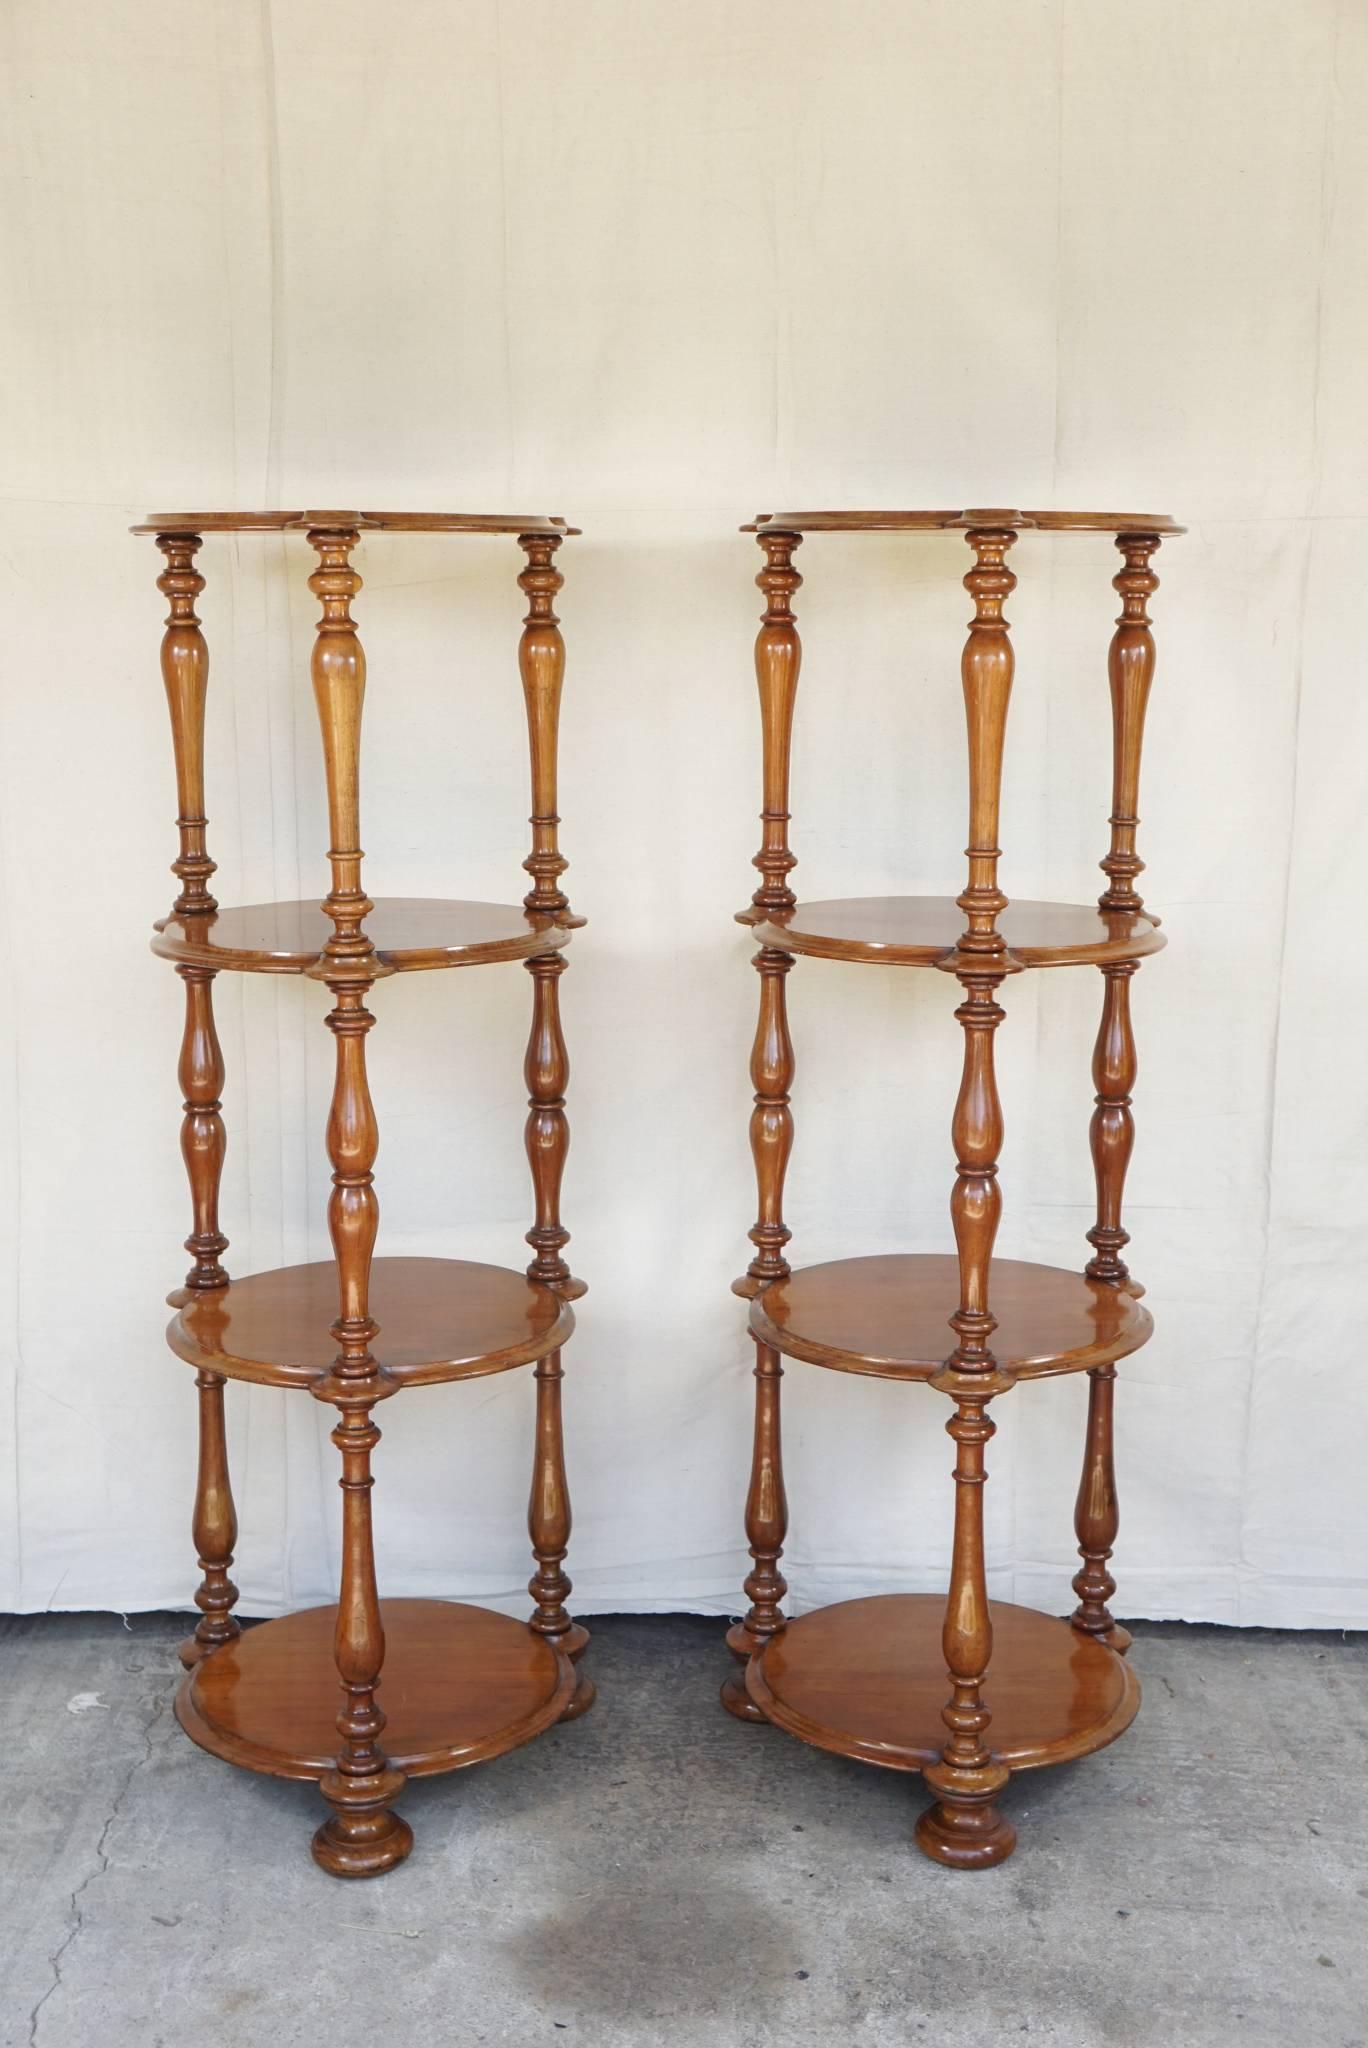 Unusual pair of étagères, made circa 1845-1850 in England in a round form are masculine and formal but not fussy or over decorated. The Mahogany color is warm and light not a deep red as is so often found. The finish is original and mellow but with